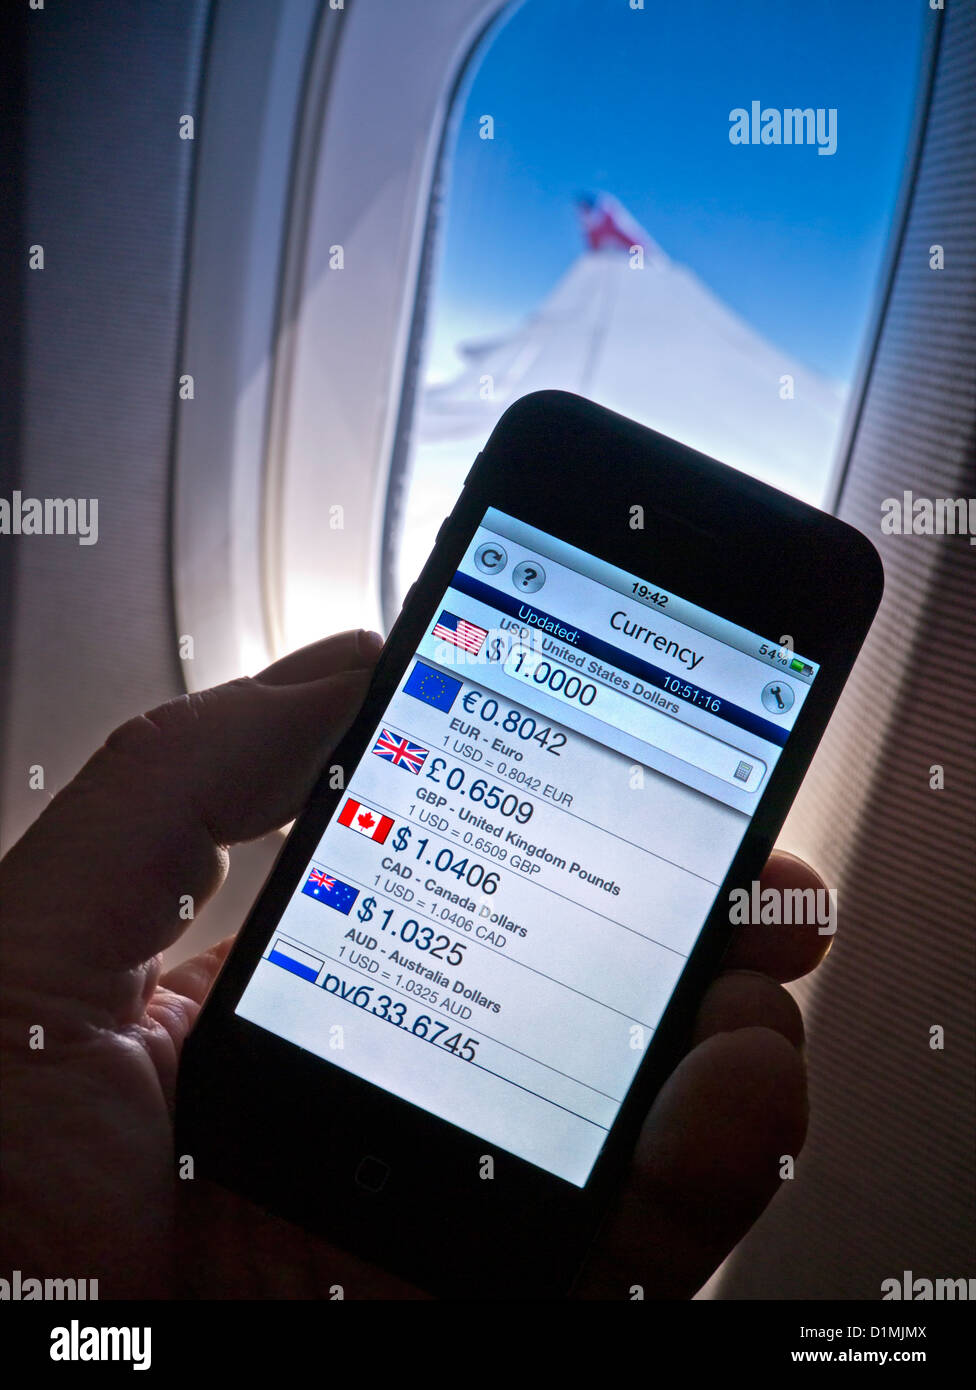 Exchange rates 2012 iPhone 4s smartphone app displaying historic international currency exchange rate in-flight, with cabin window wing and sky behind Stock Photo